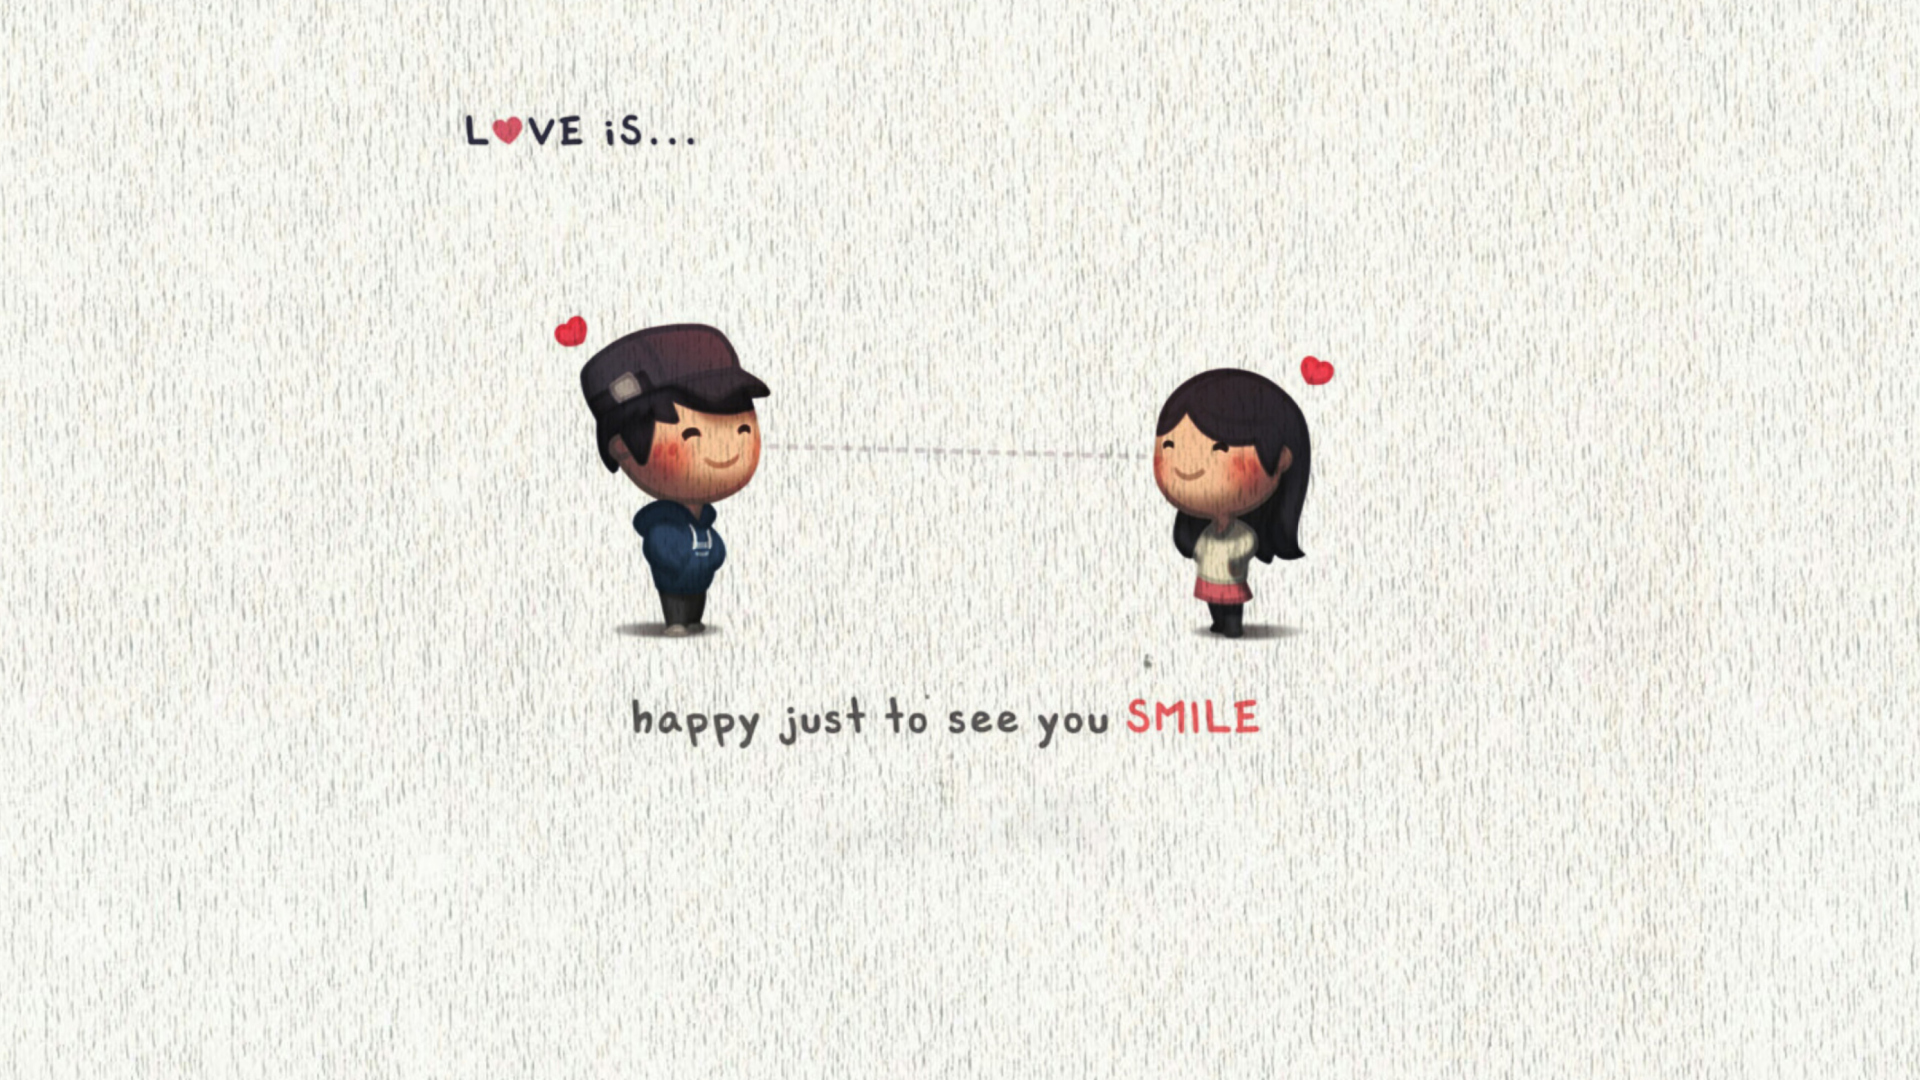 Love Is Happy Just To See You Smile wallpaper 1920x1080